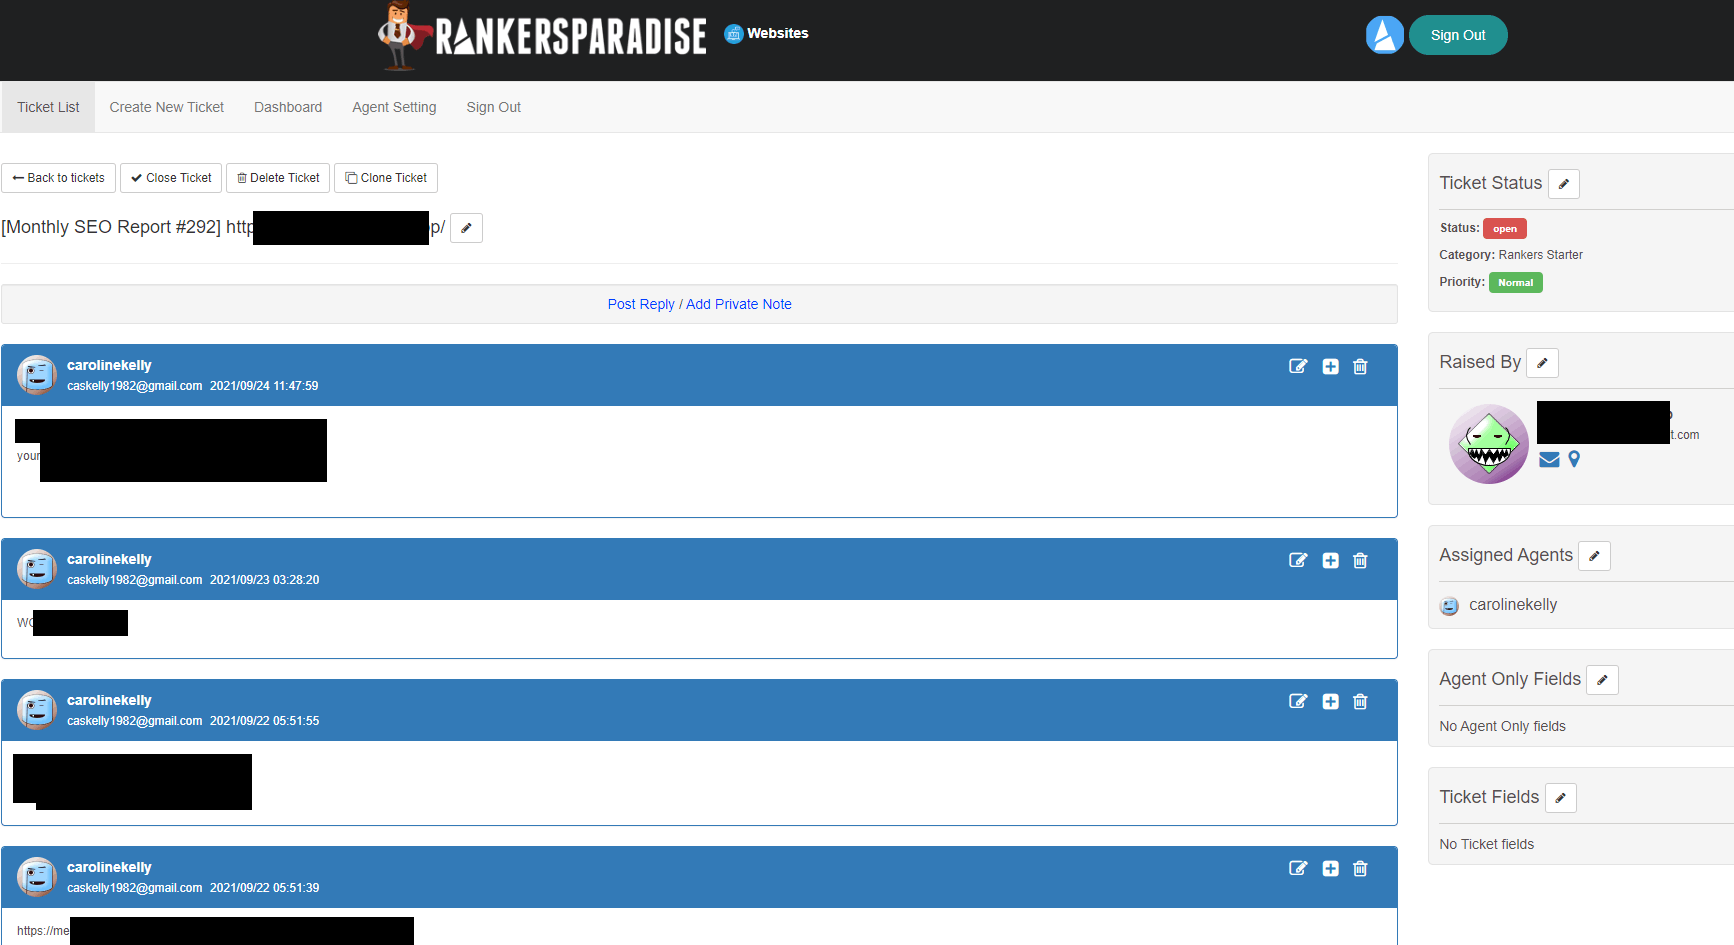 The Rankers Paradise monthly SEO dashboard